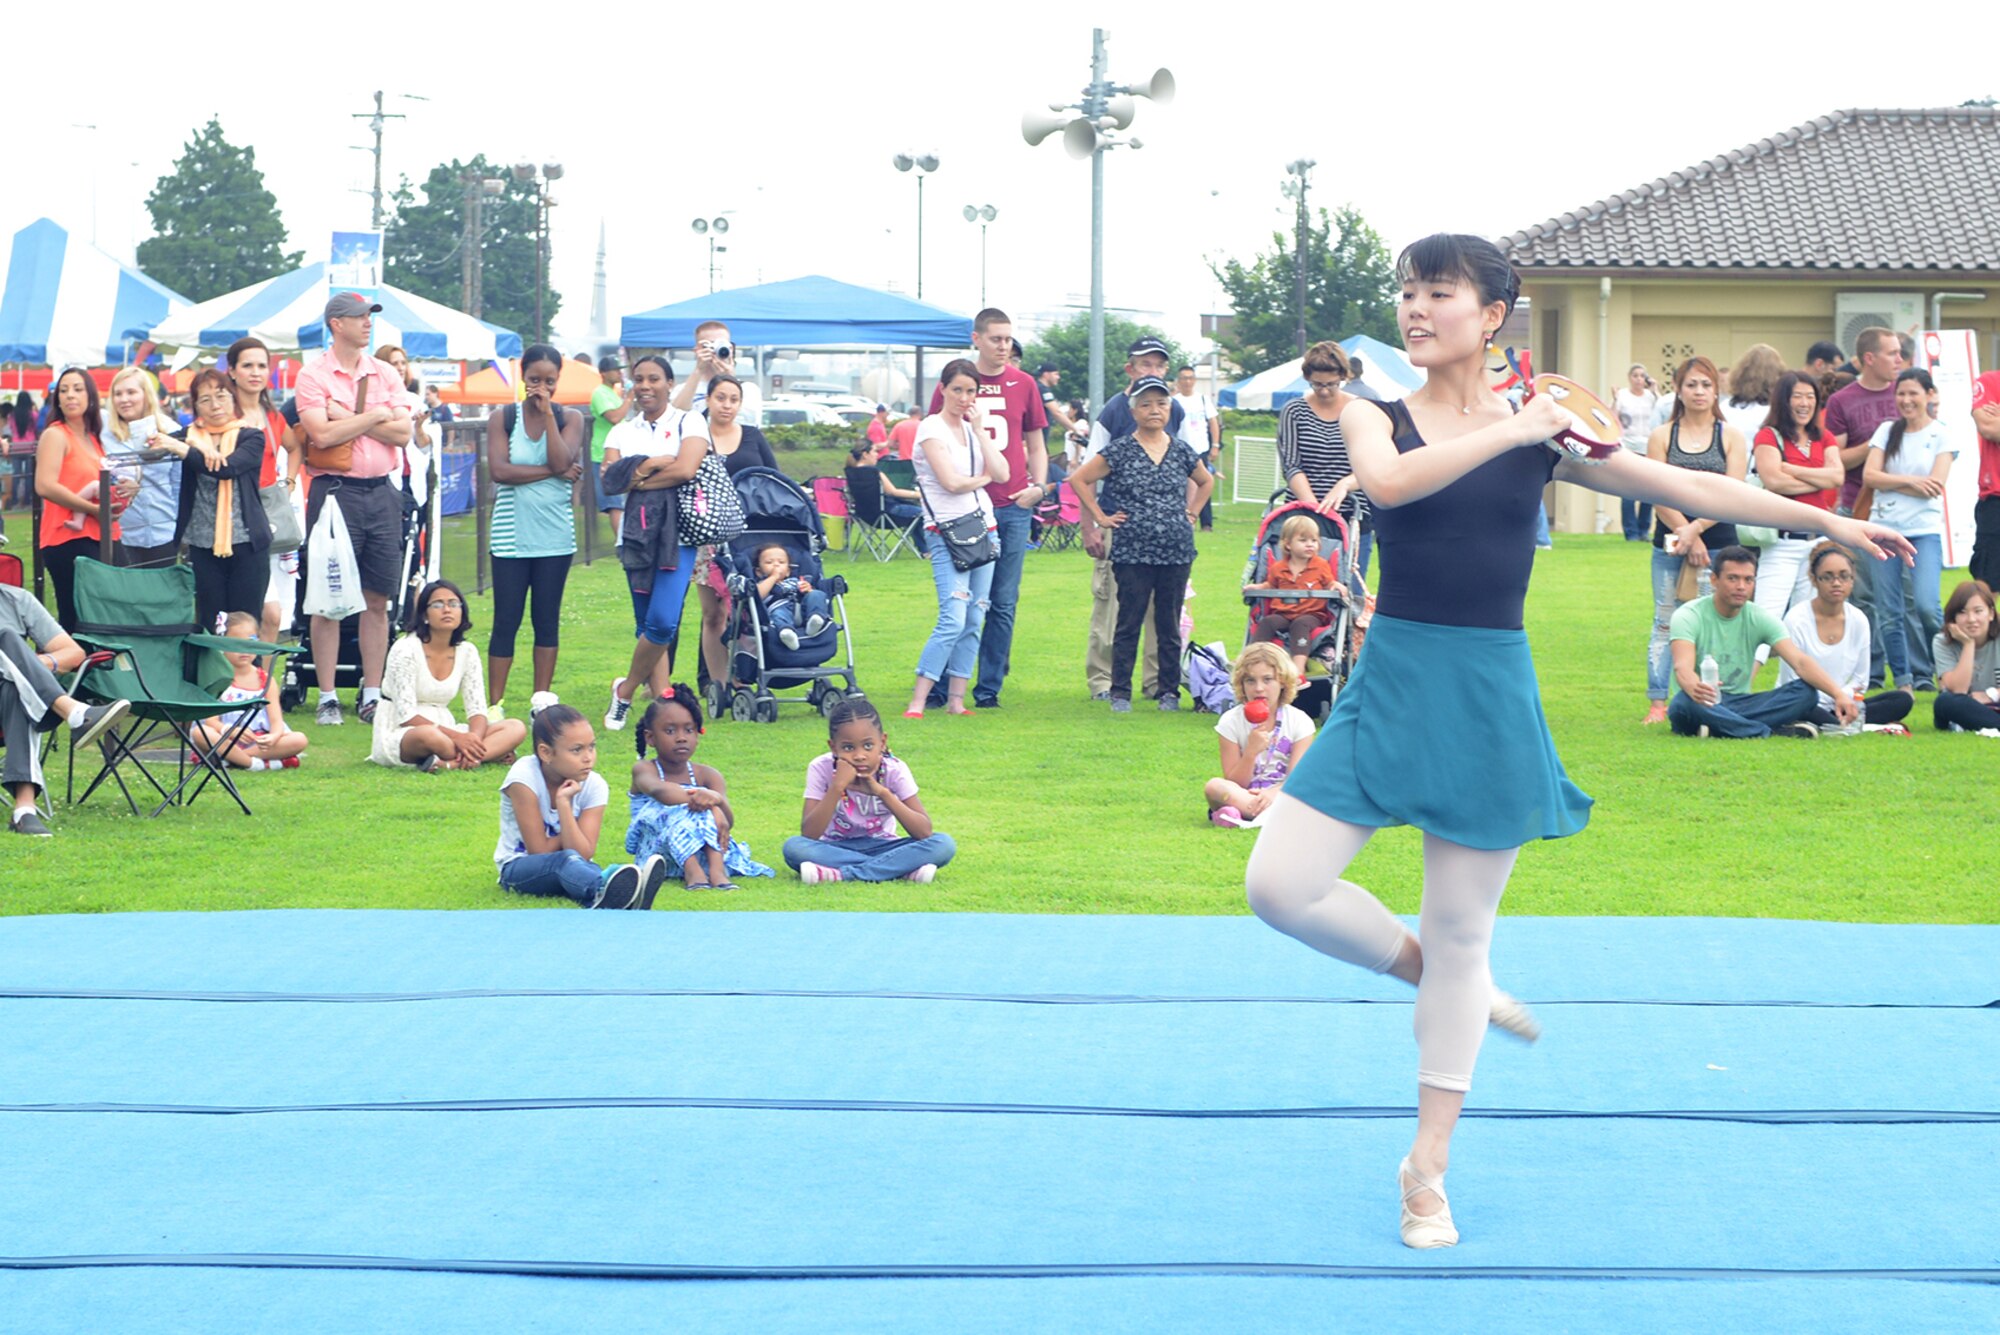 A dancer performs for members of Team Yokota during Celebrate America at Yokota Air Base, Japan, July 2, 2015. The 374th Force Support Squadron hosted events throughout the day to include a 5k Fun Run, the Leaky Kon Tiki race, go-karts, carnival booths and performances from the Band of the Pacific-Hawaii 'Hana Hou!'. (U.S. Air Force photo by Airman 1st Class David C. Danford/Released)